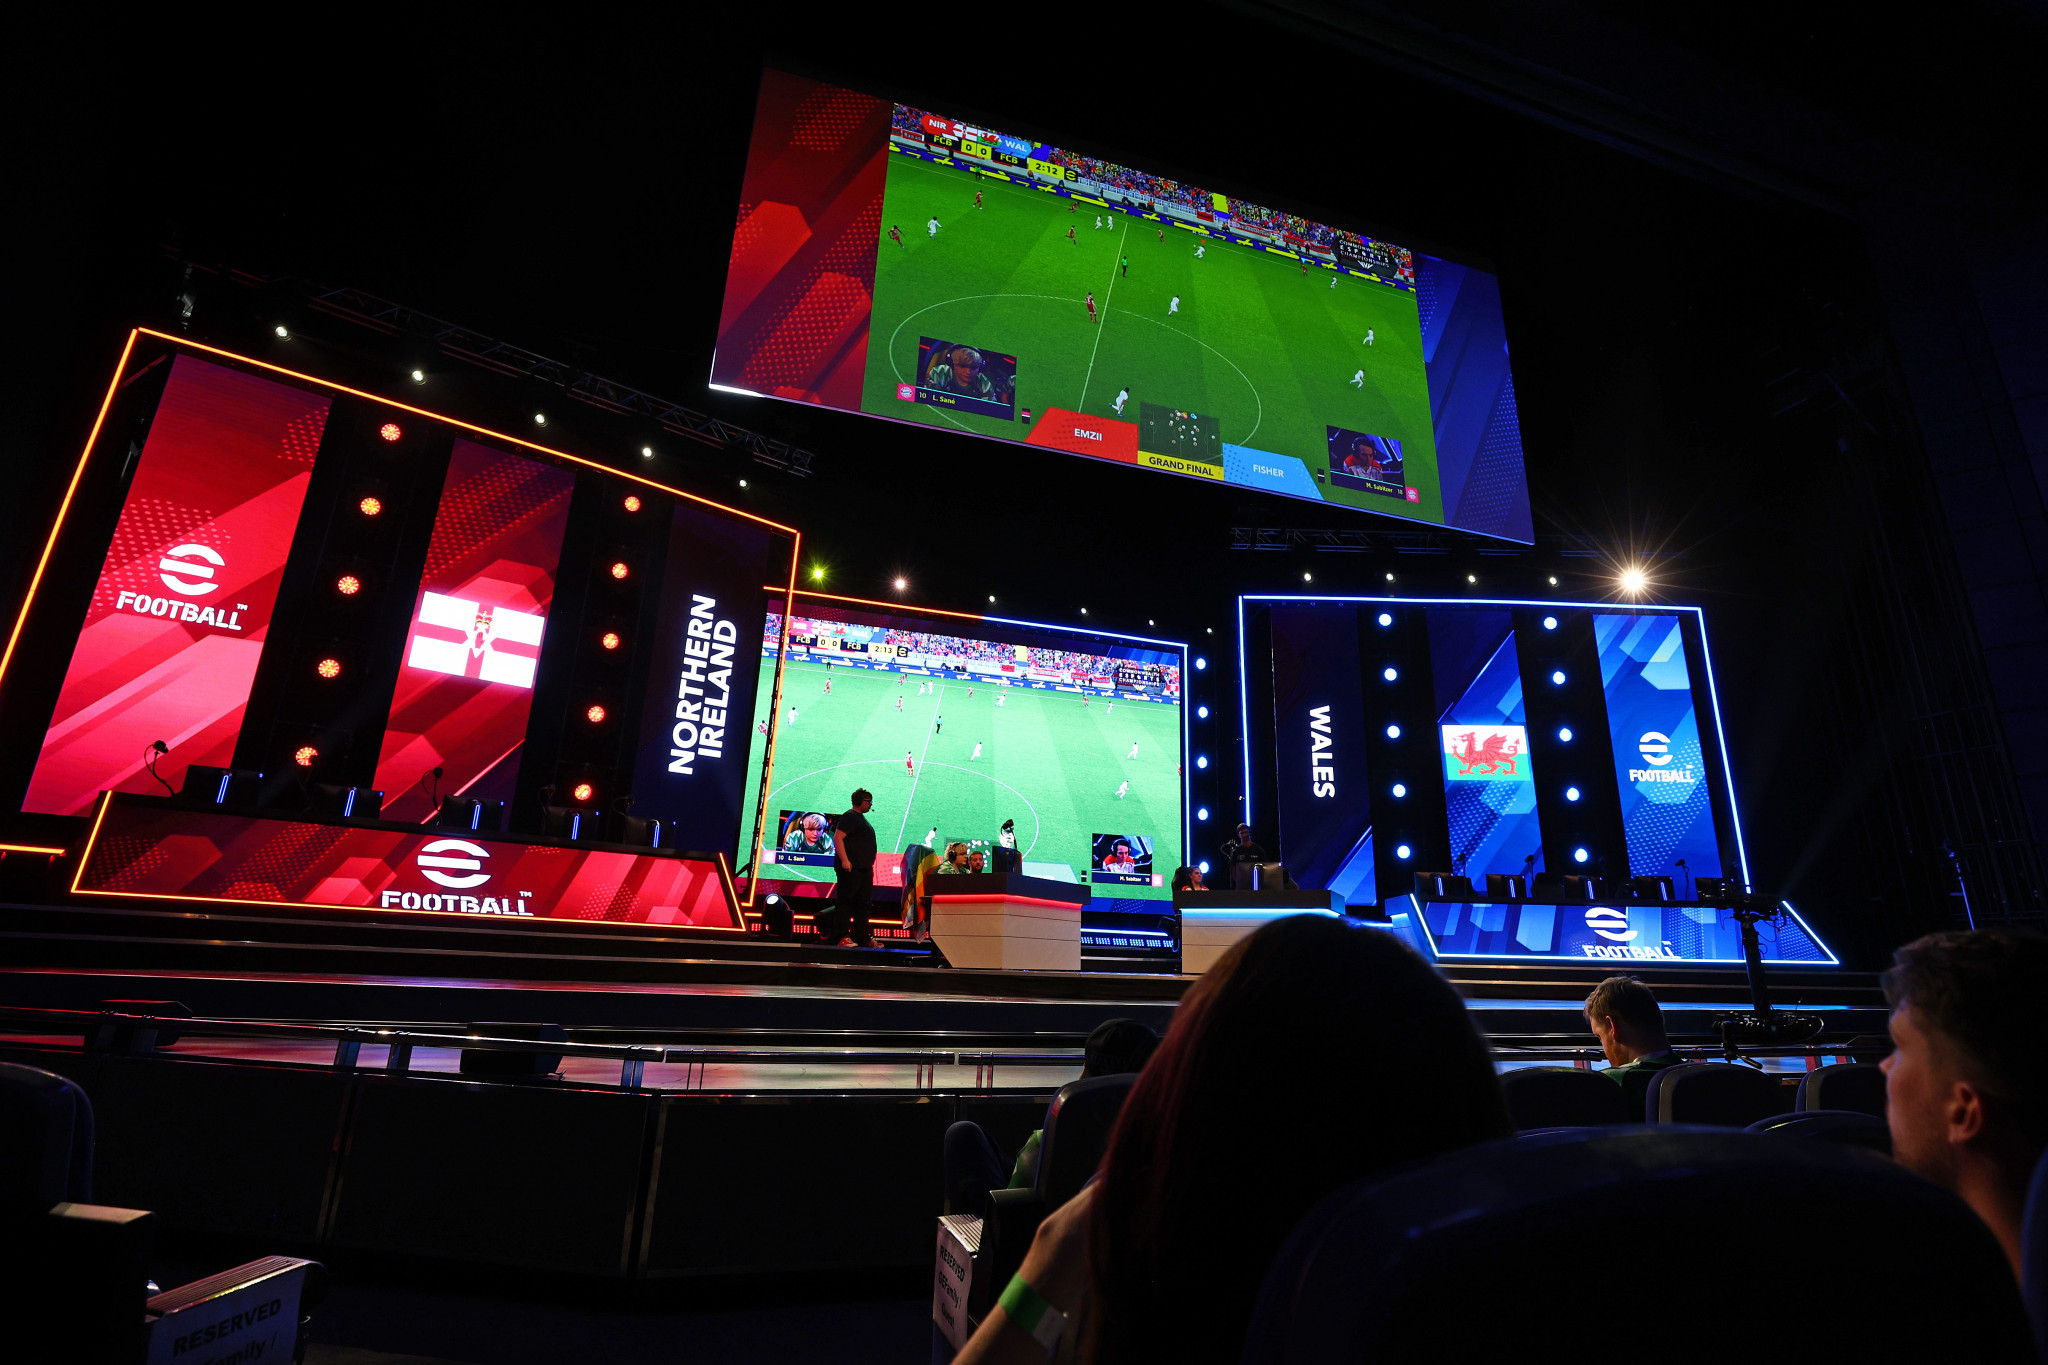 eFootball 2023 semi-finalists confirmed at IESF World Championships